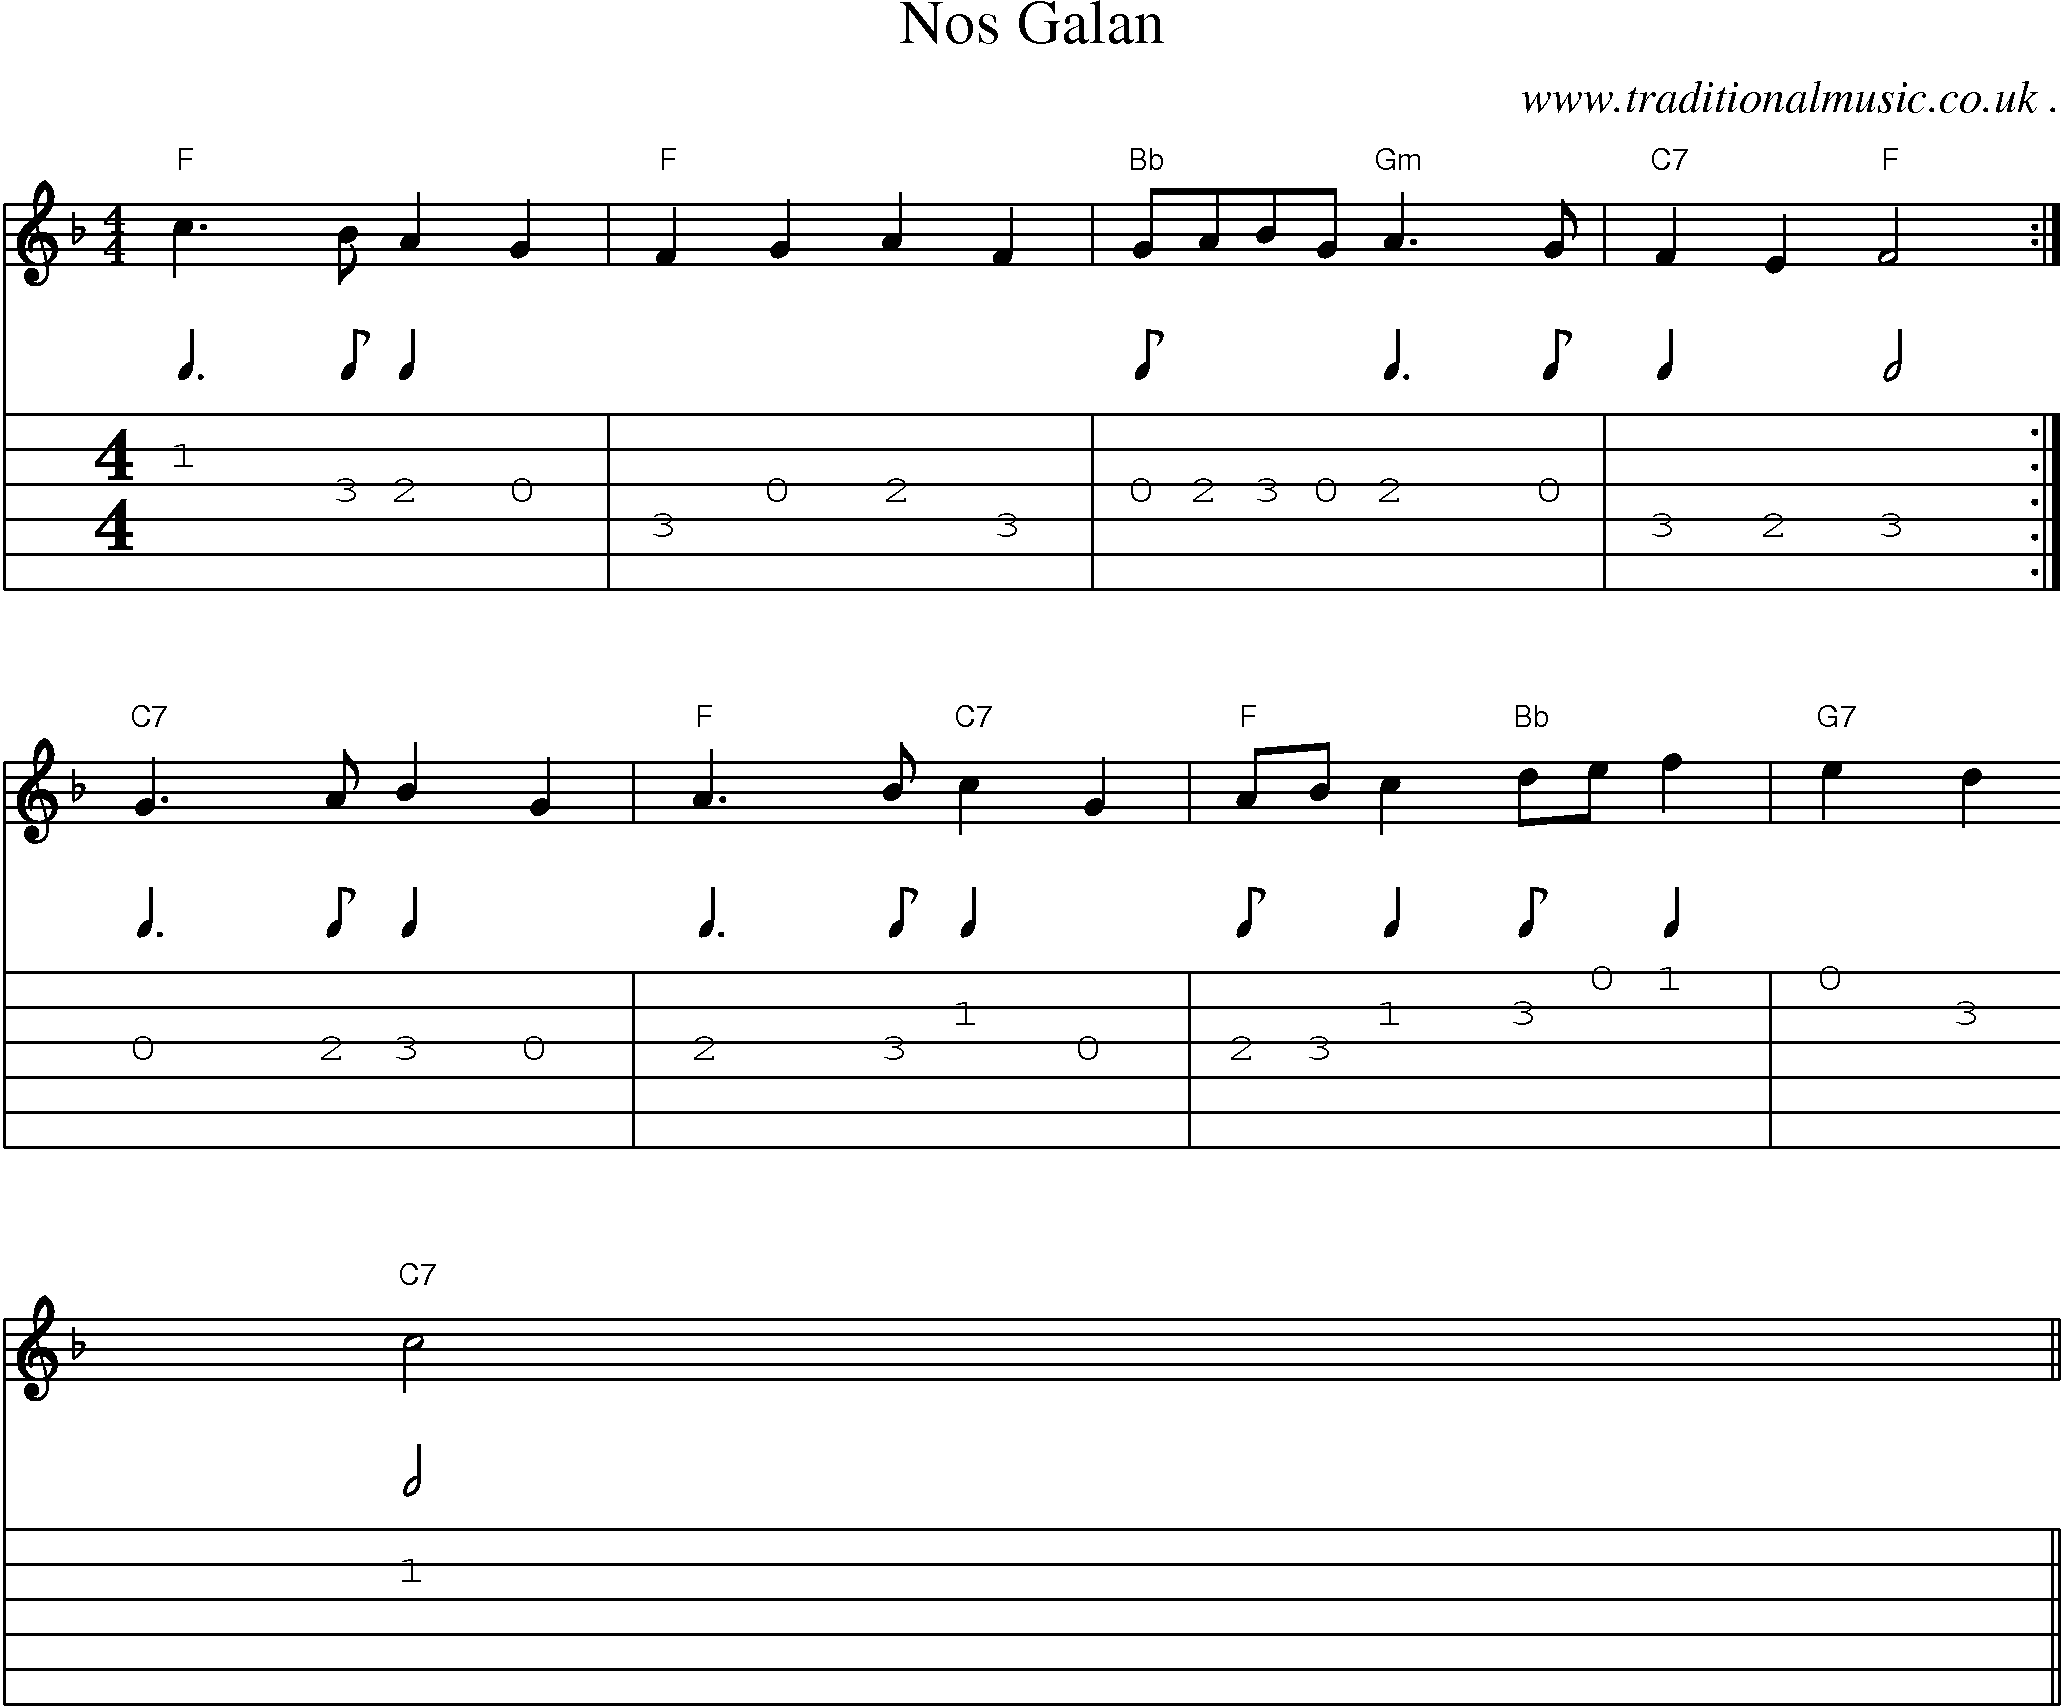 Sheet-Music and Guitar Tabs for Nos Galan